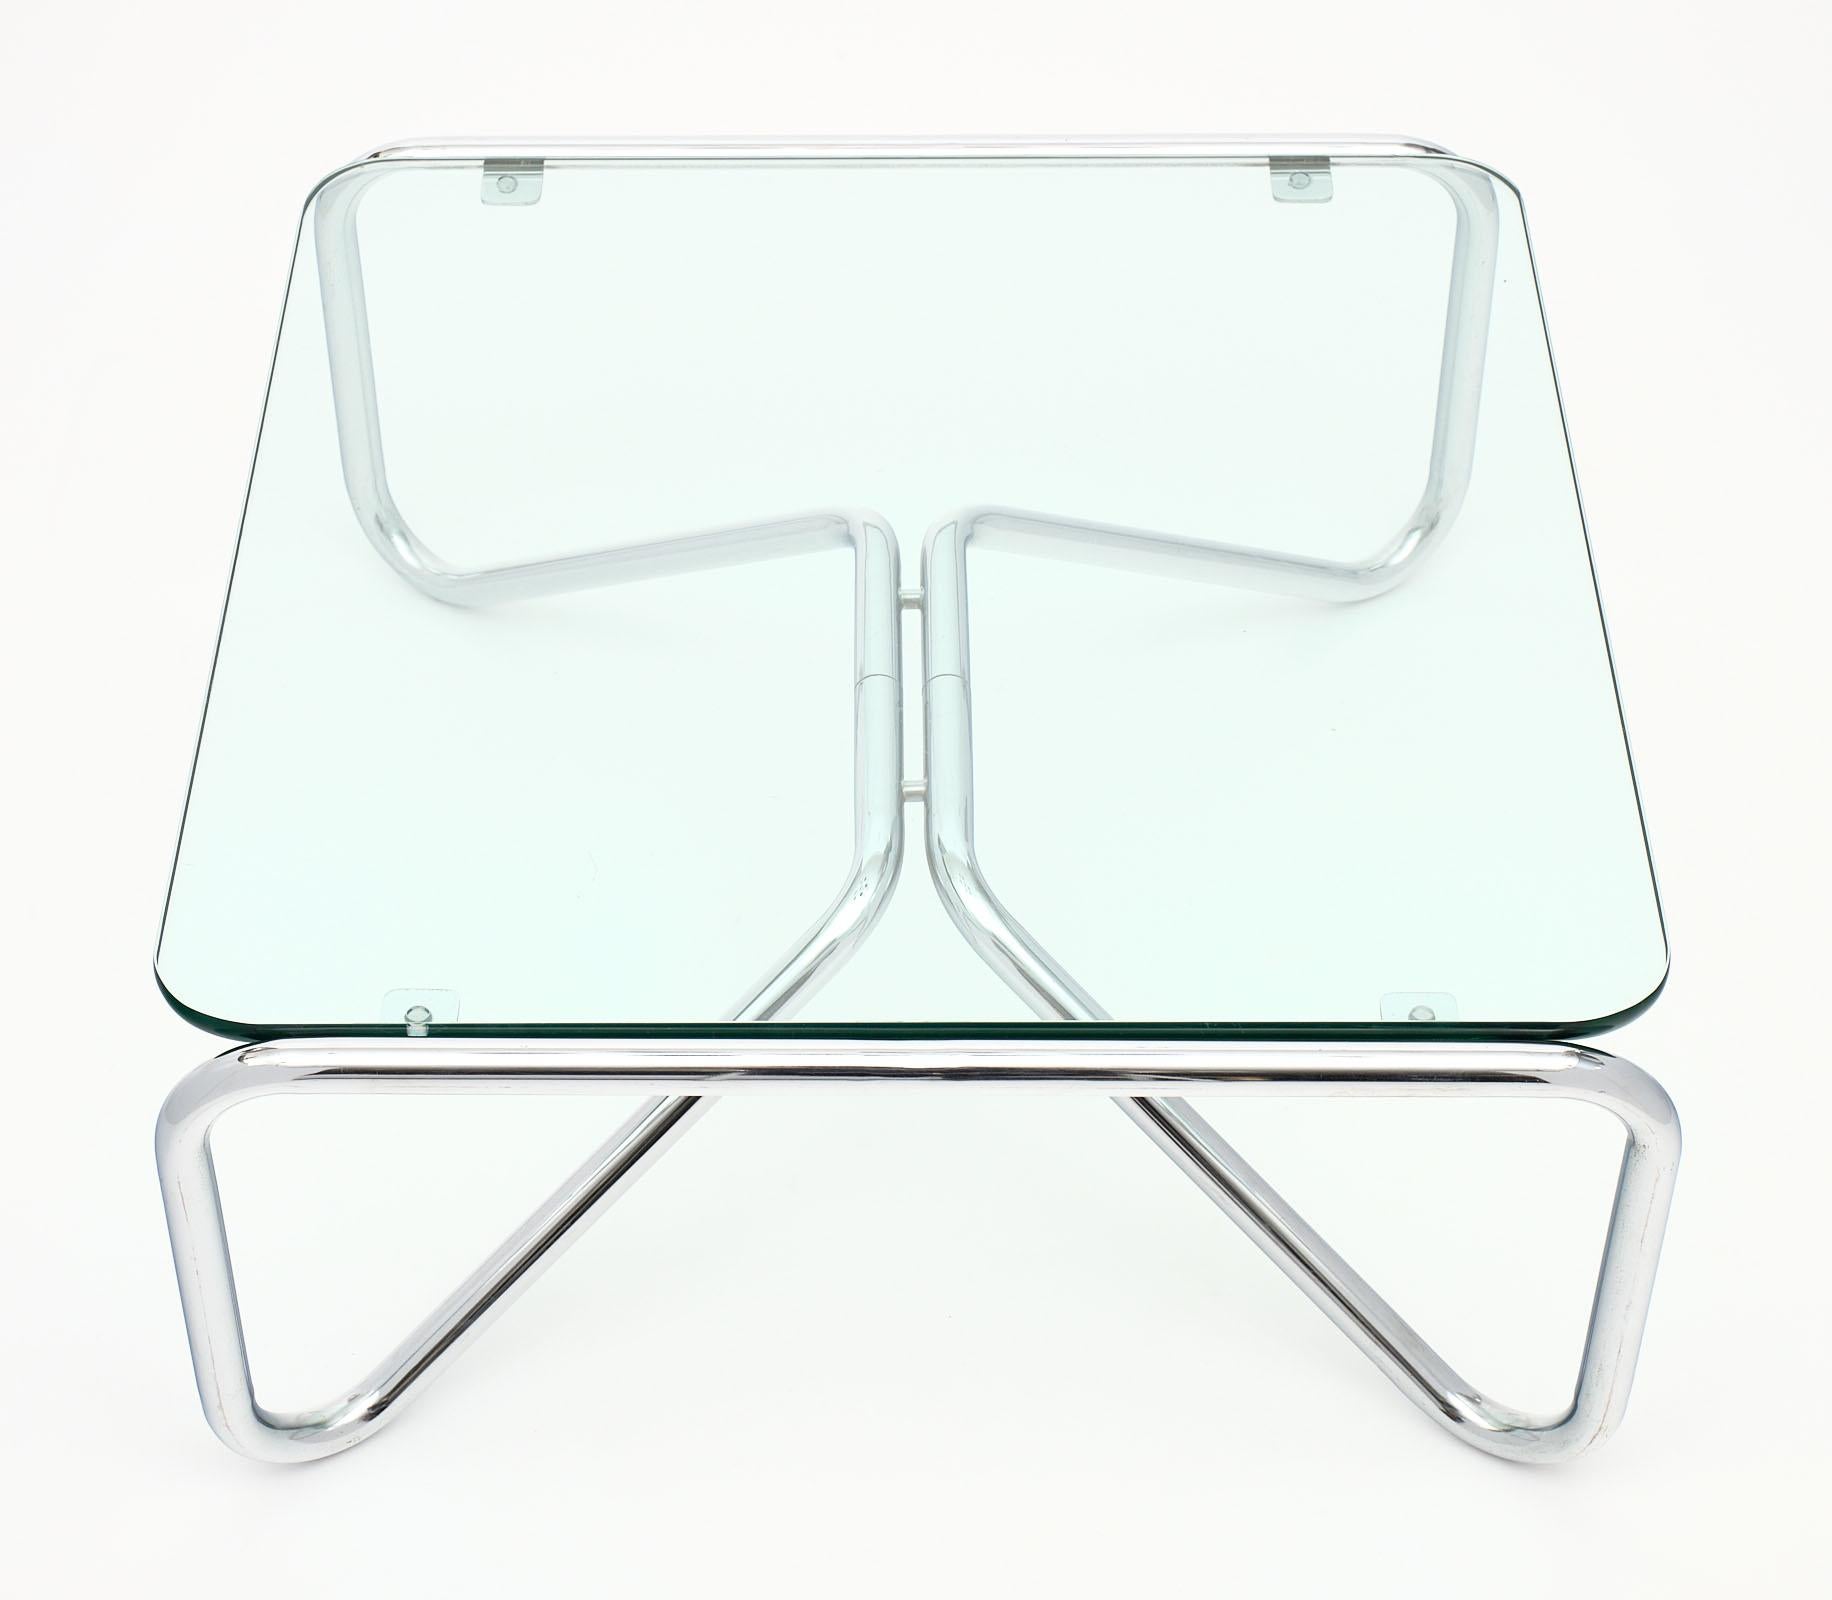 Pair of chrome and glass coffee tables with tubular chrome structures and glass slabs in great condition. We love the clean lines and impressive feel these tables bring to a space.